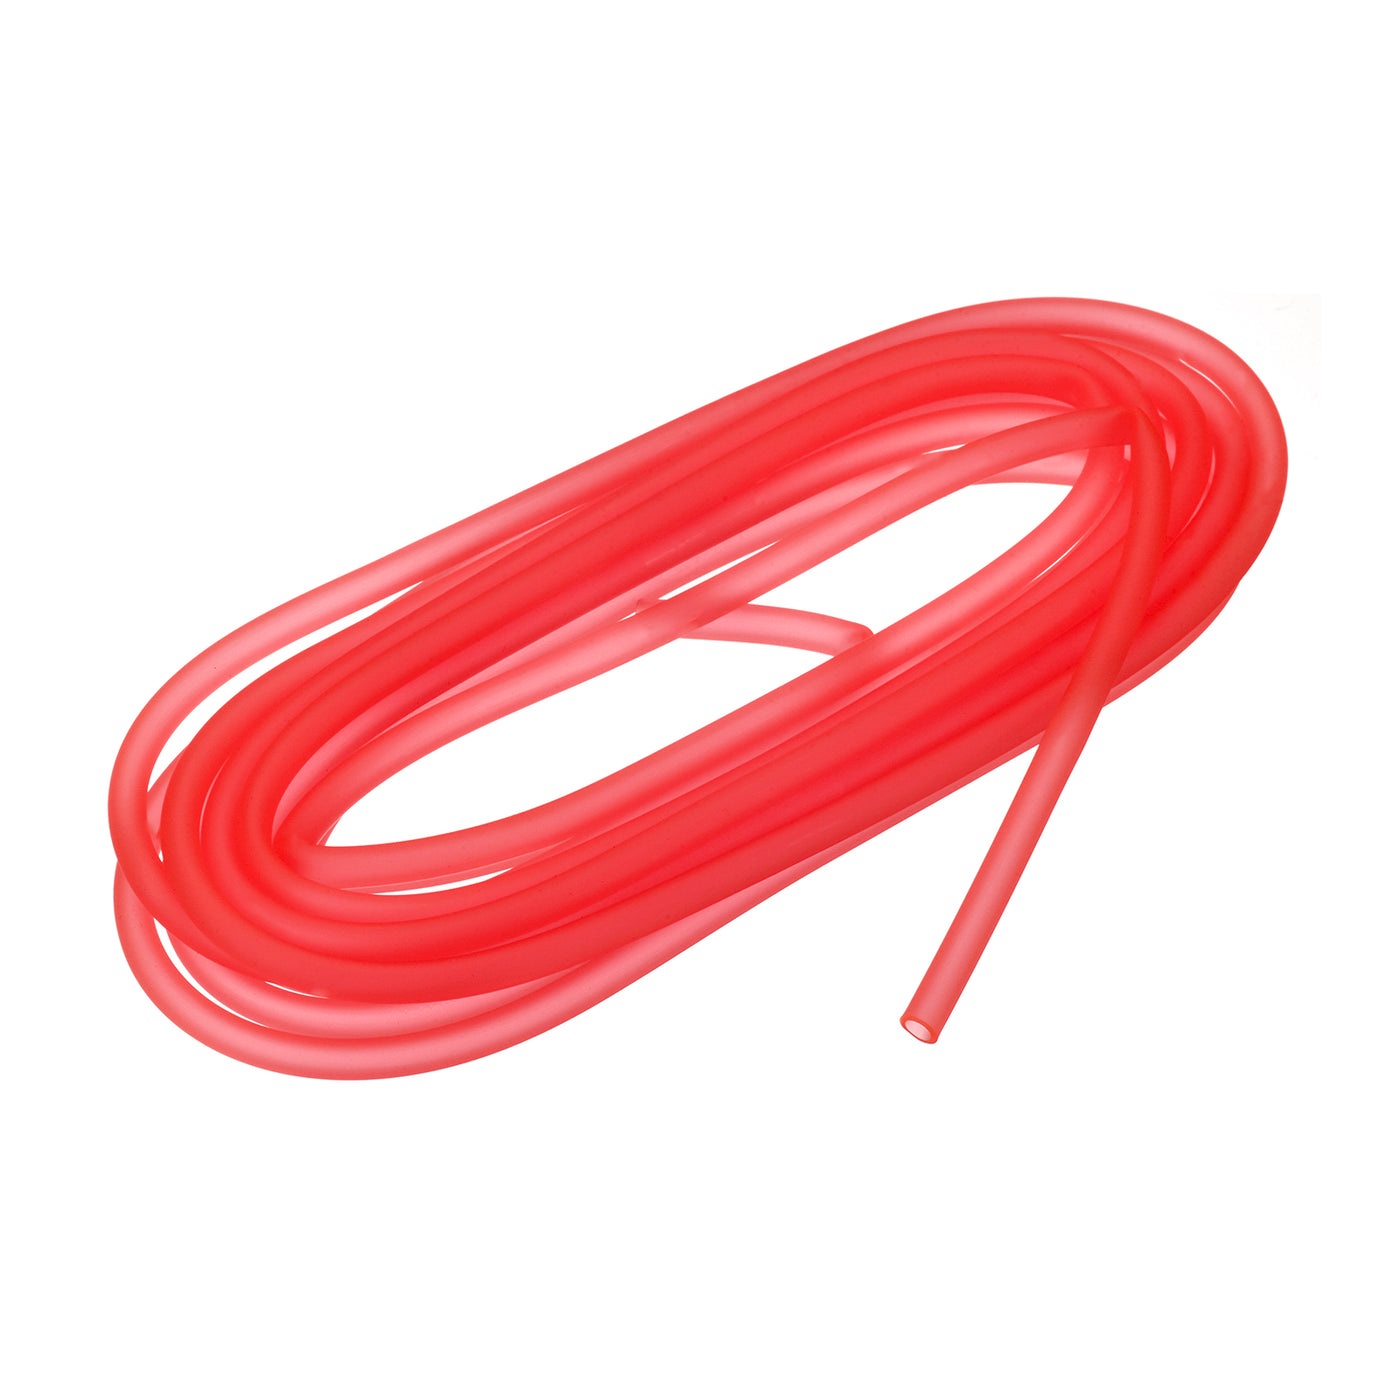 uxcell Uxcell Silicone Tubing 5/32" ID, 15/64" OD 1Pcs 13.12 Ft for Pump Transfer, Red